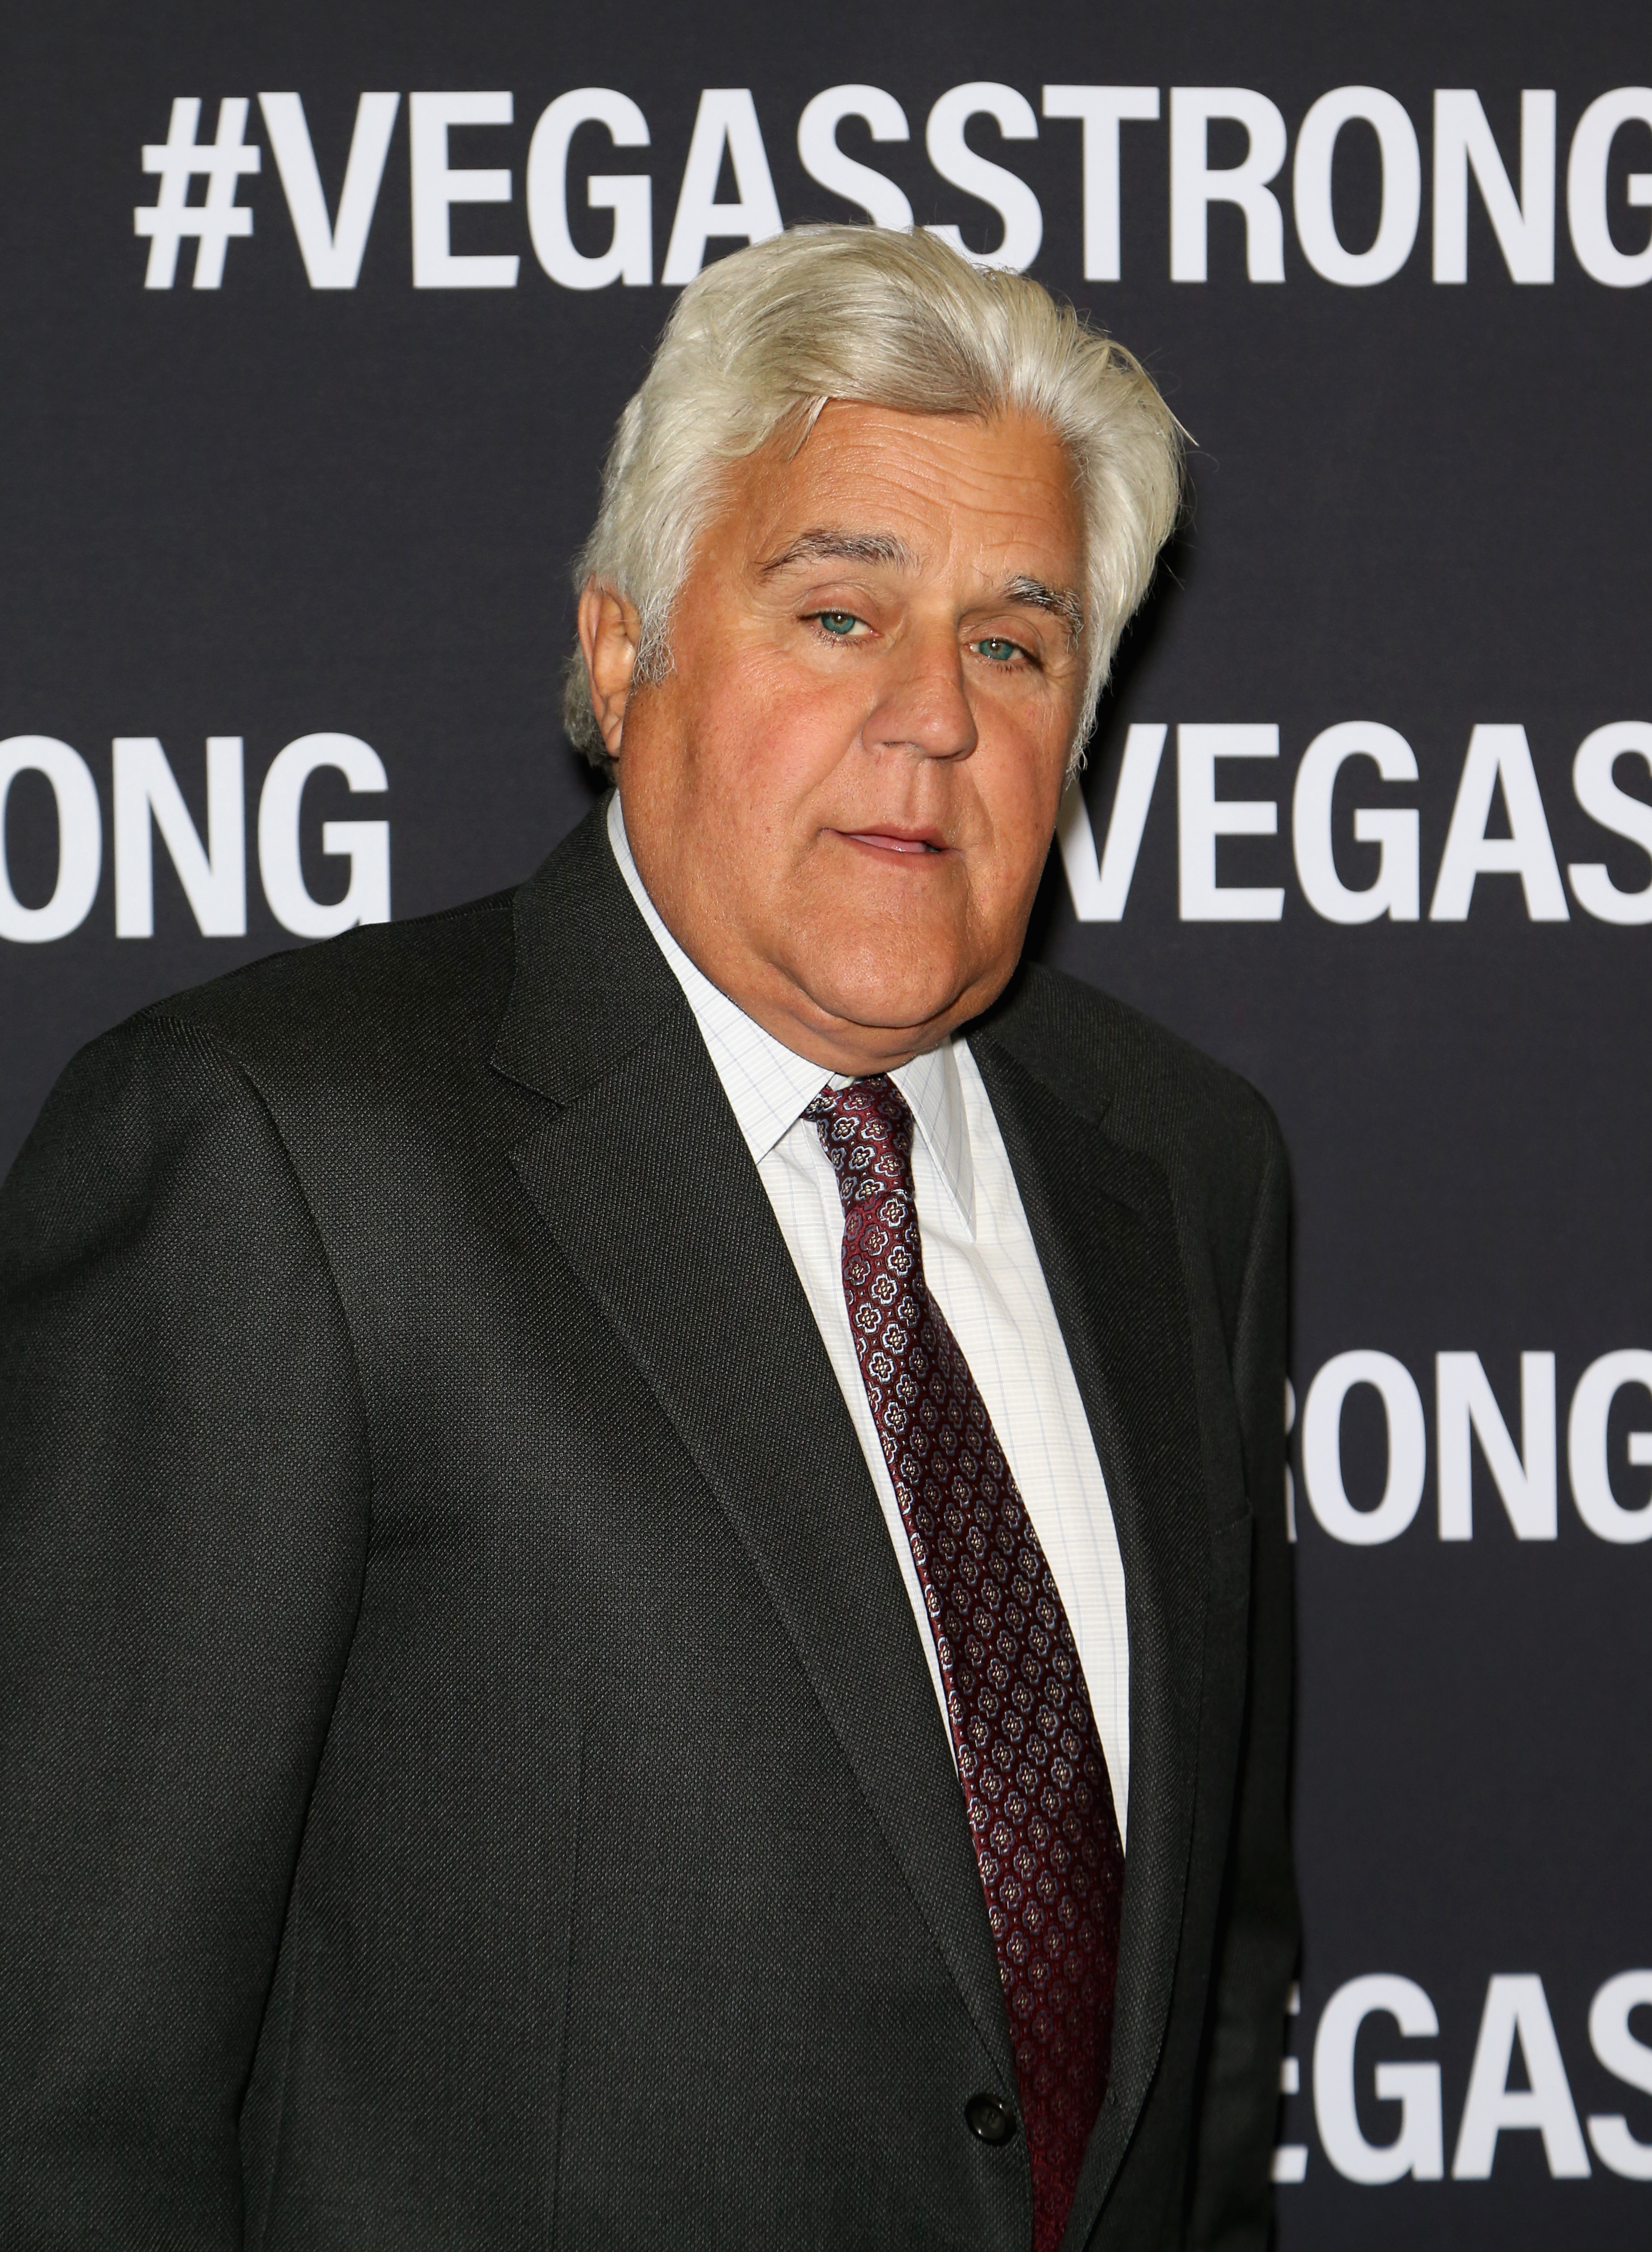 Jay Leno poses at the Vegas Strong Benefit Concert at T-Mobile Arena to support victims of the October 1 tragedy on the Las Vegas Strip on December 1, 2017, in Las Vegas, Nevada | Source: Getty Images